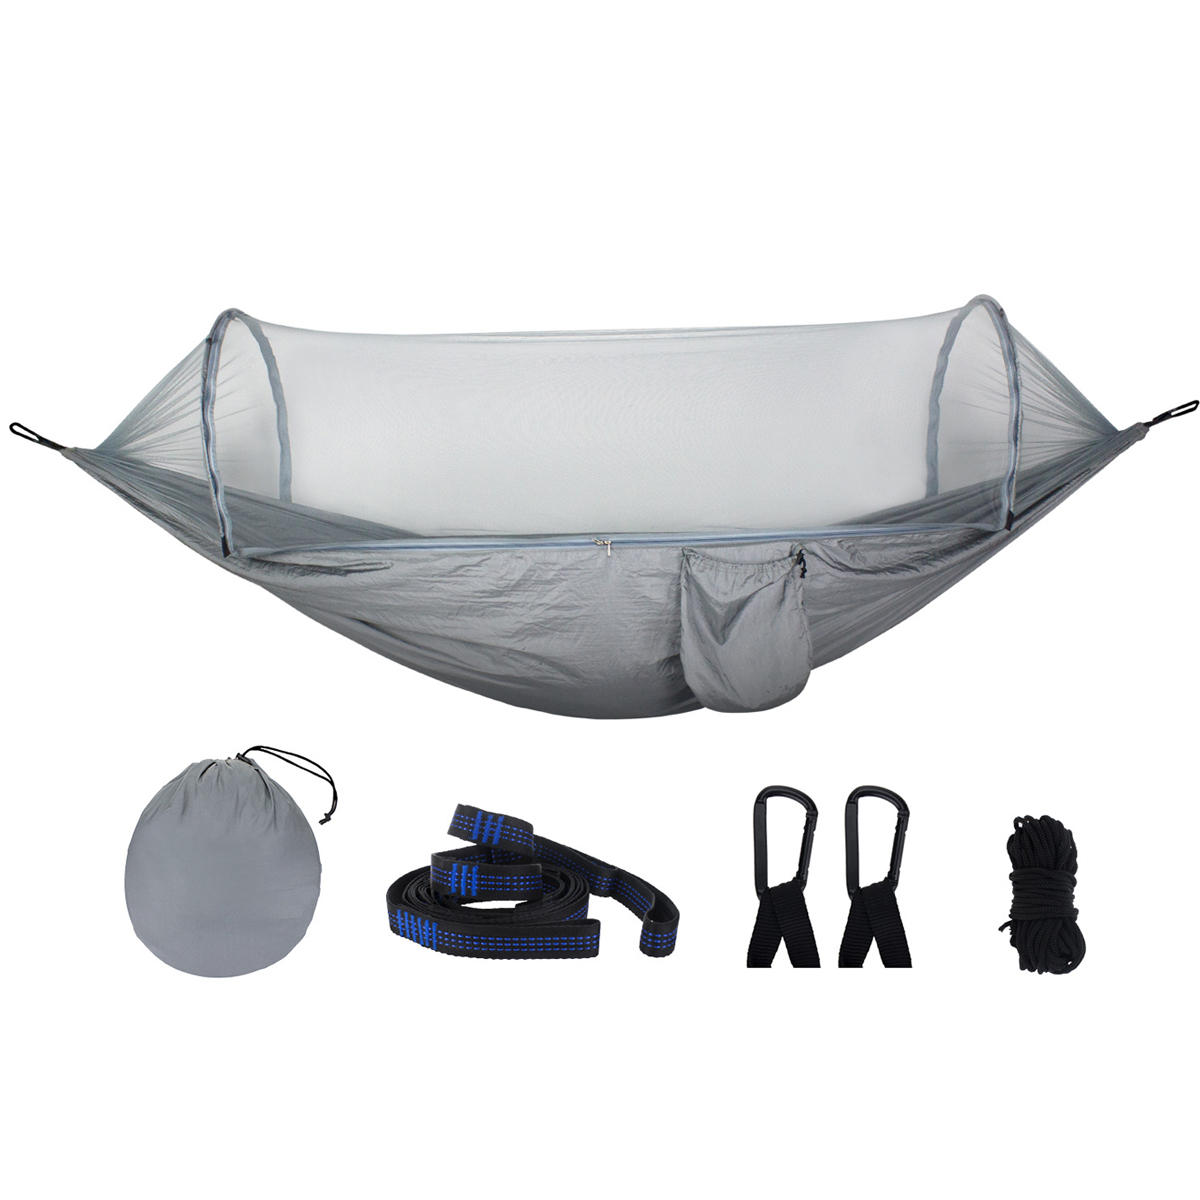 270x140cm Auto Quick Open Hammock Outdoor Camping Hanging Swing Bed With Mosquito Net Max Load 250kg  